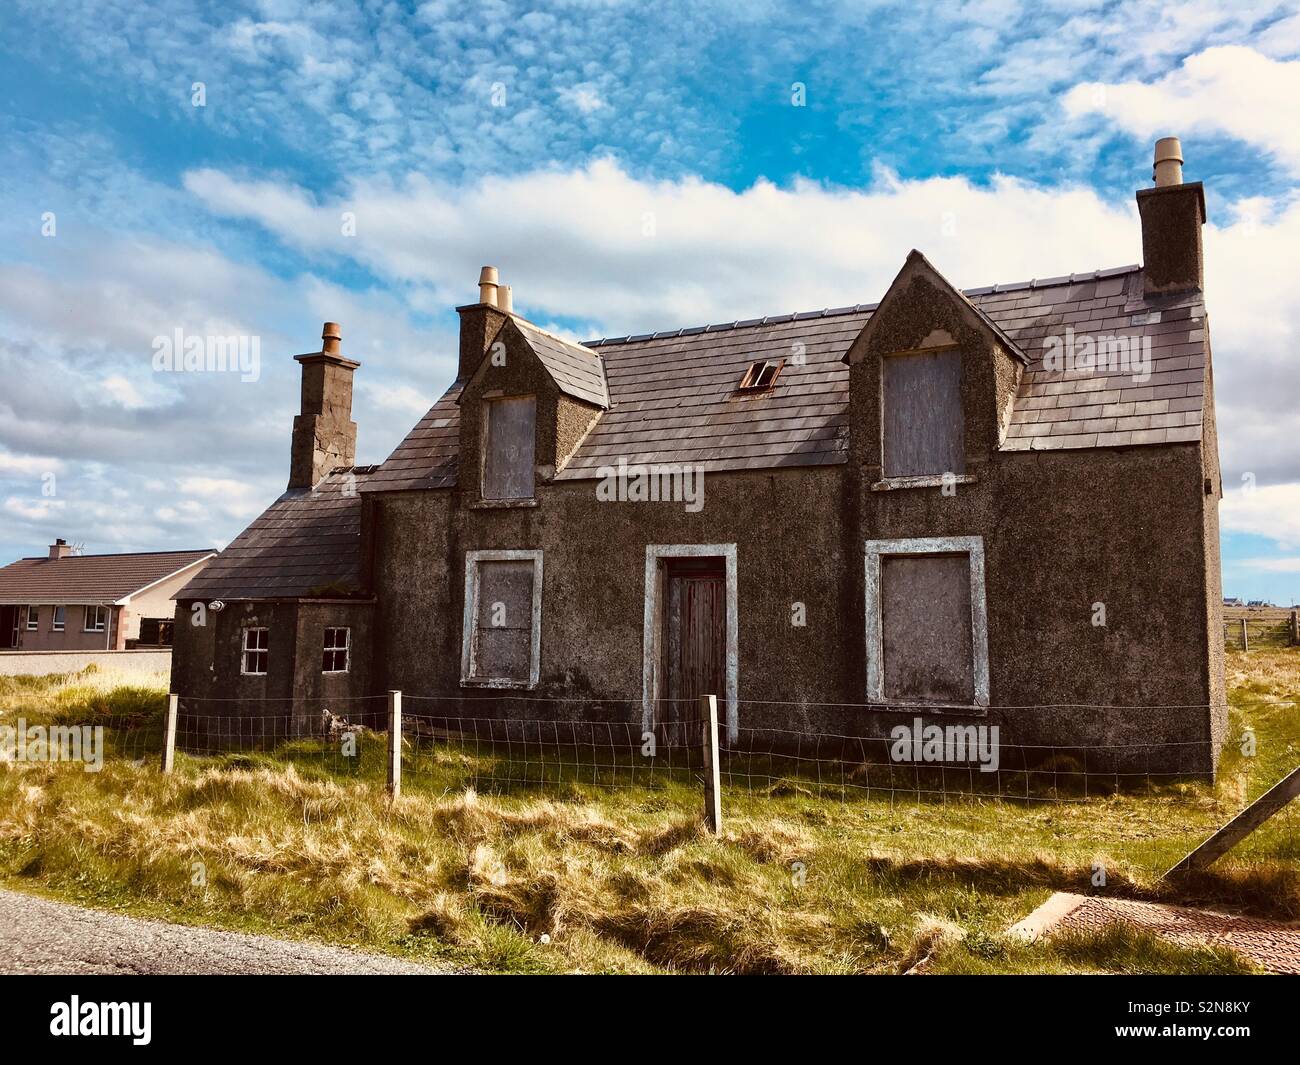 Boarded up derelict house in the Outer Hebrides Stock Photo